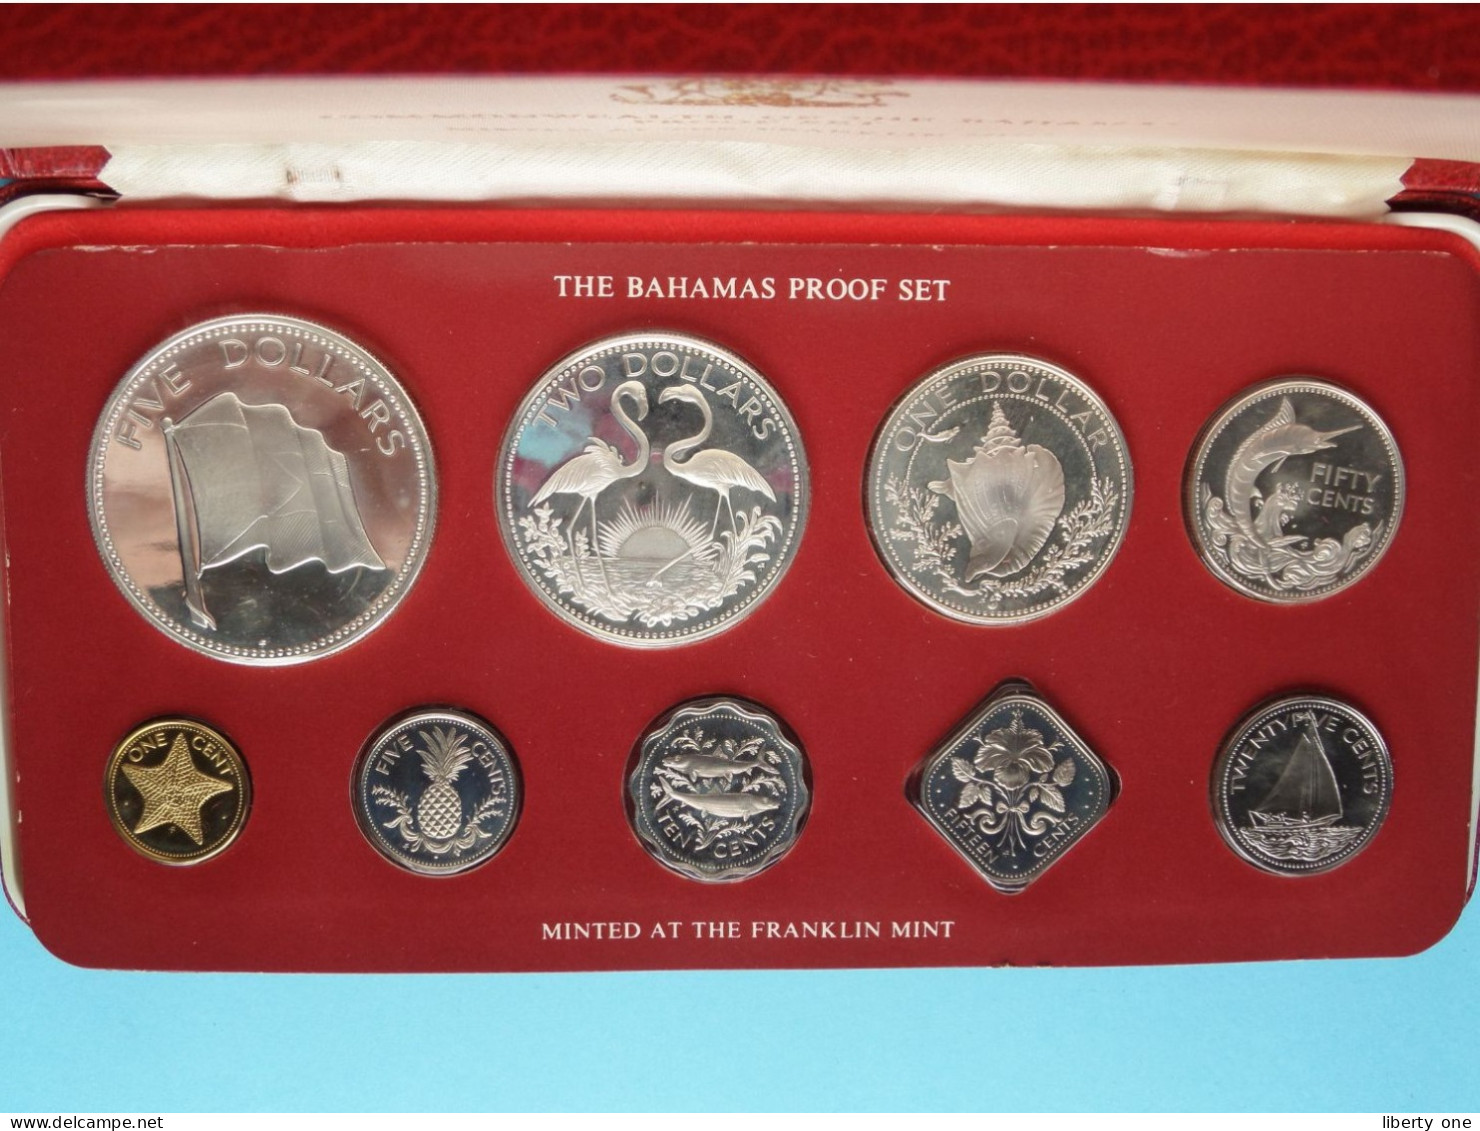 Commonwealth of the BAHAMAS - 1979 ( KM PS19 > Proof Set >>> please see SCANS ) Franklin Mint / Made in the U.S.A. !